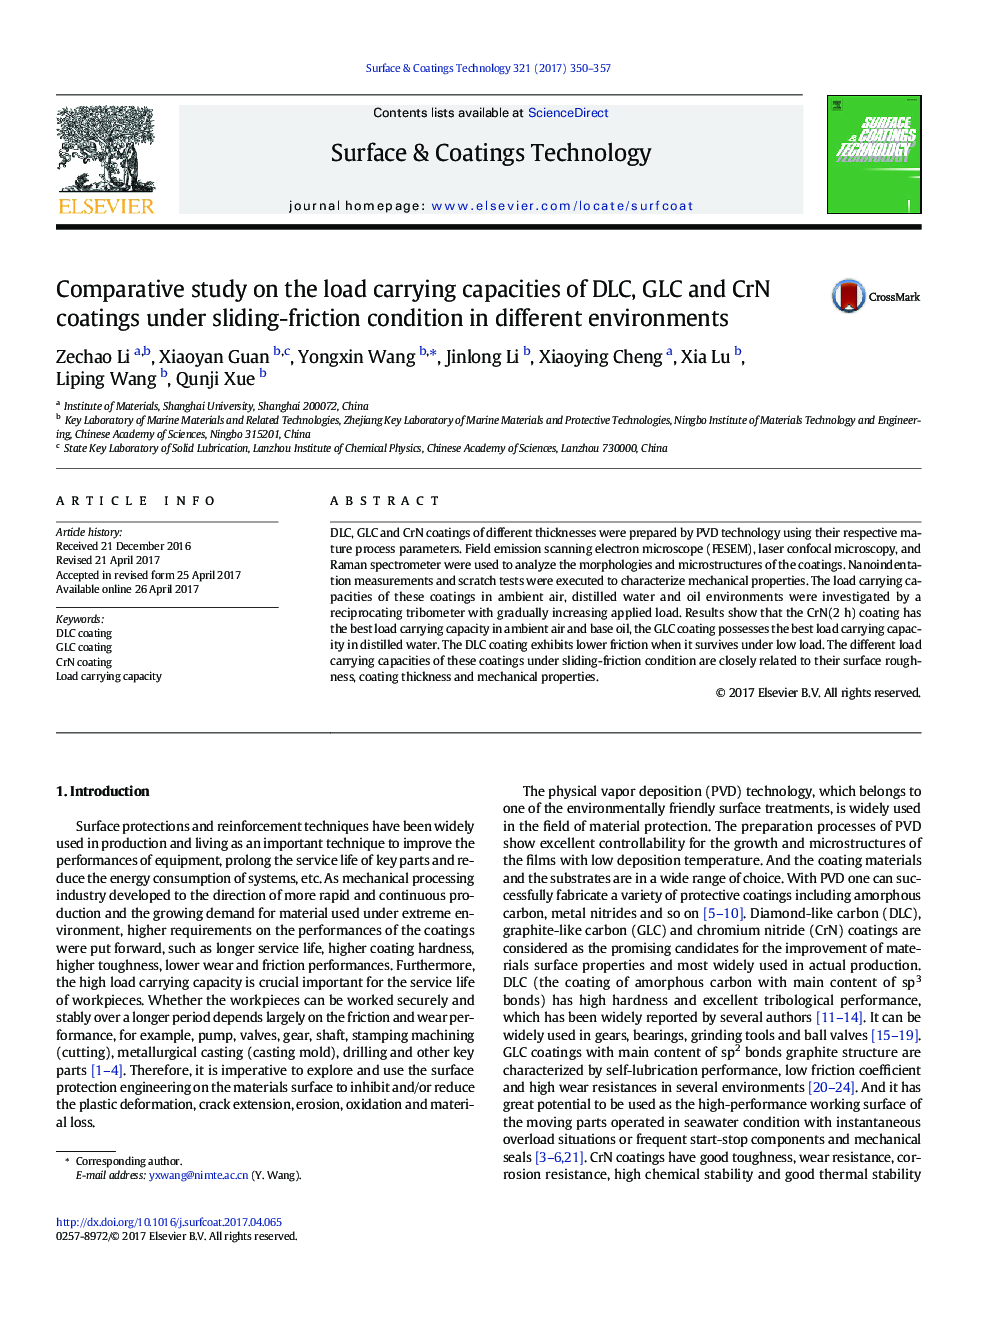 Comparative study on the load carrying capacities of DLC, GLC and CrN coatings under sliding-friction condition in different environments